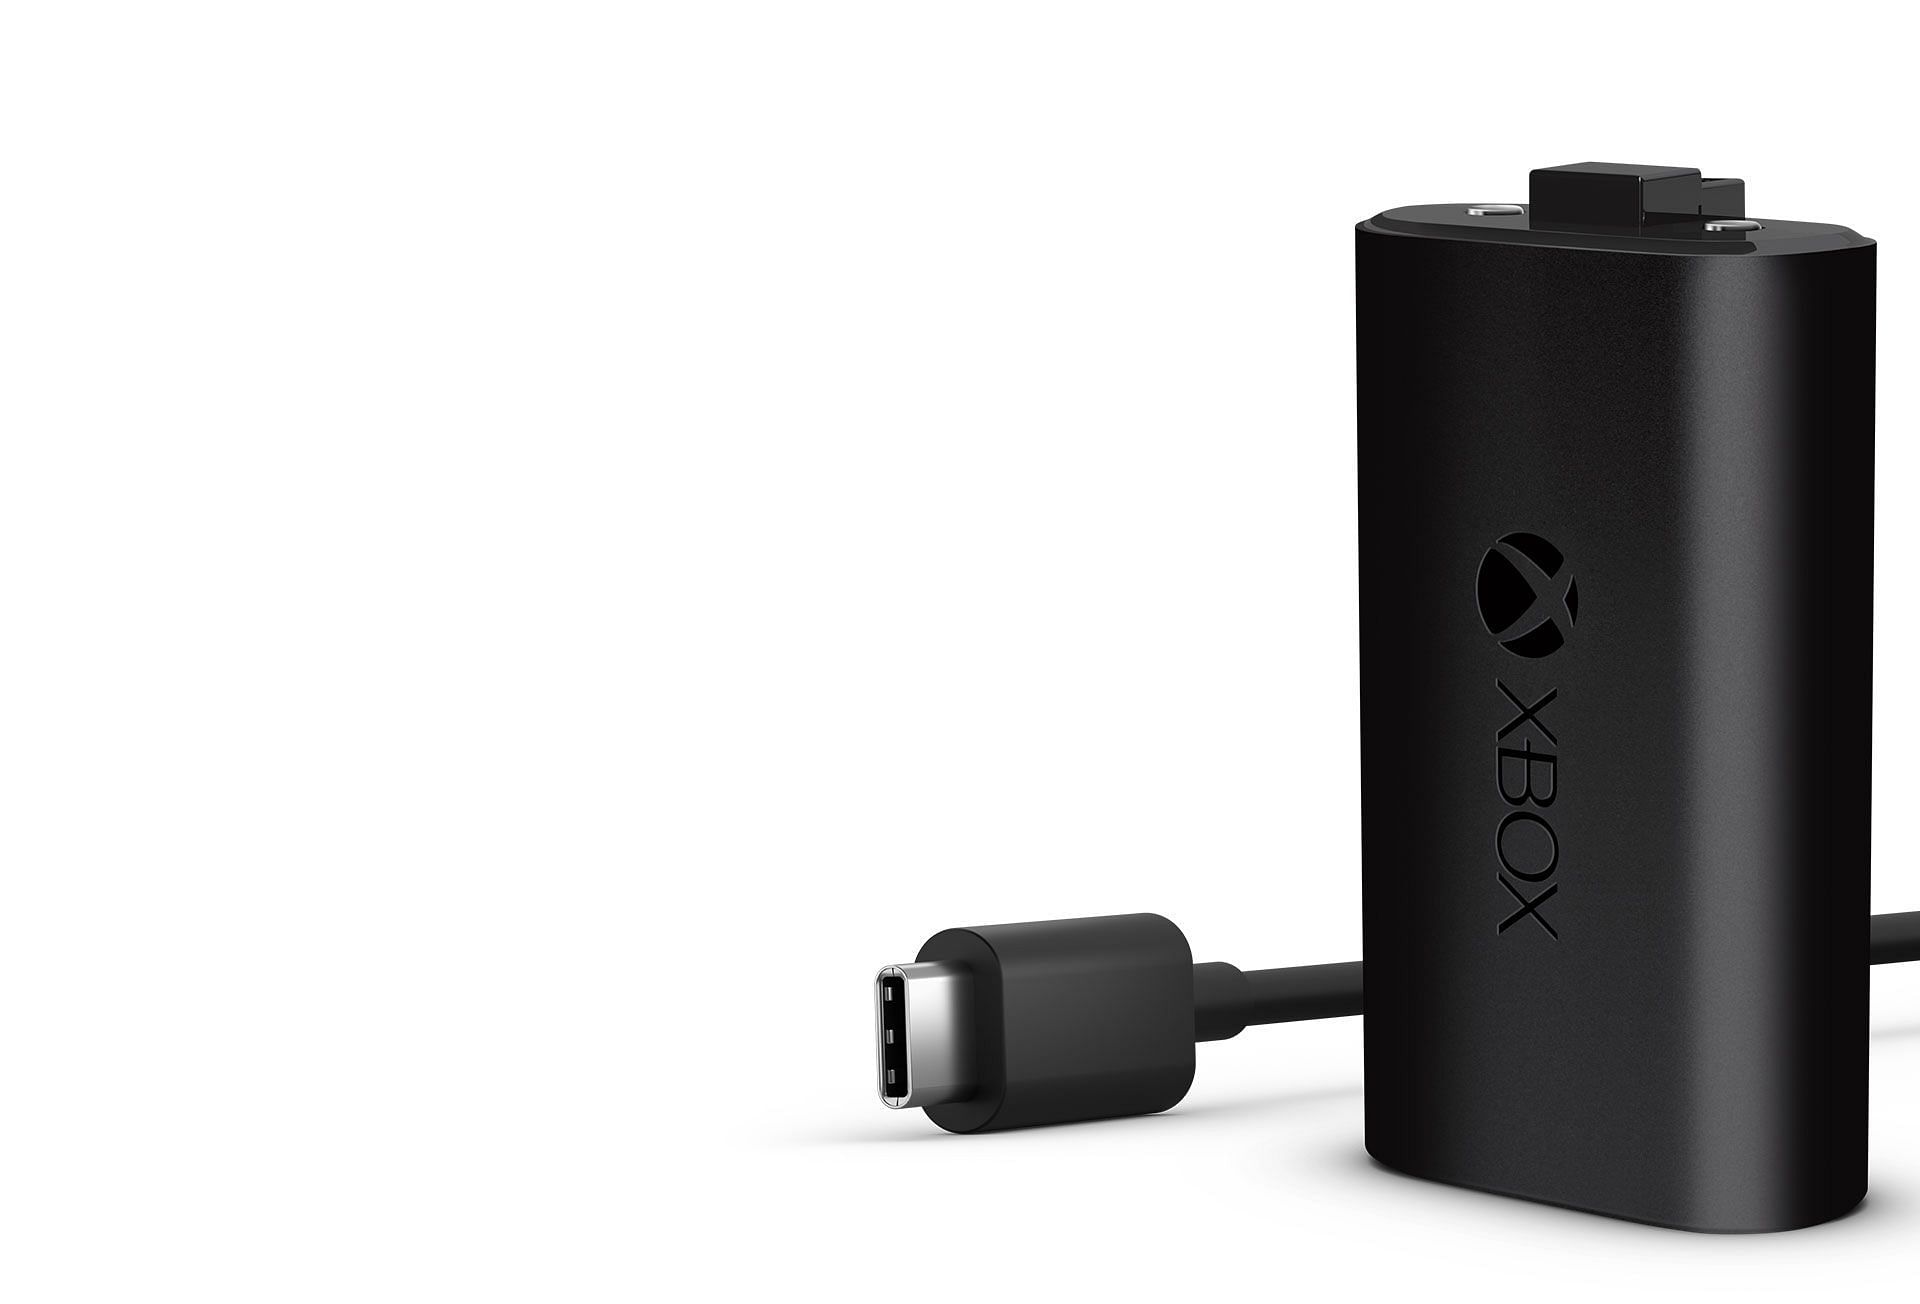 The V2 comes with a USB-C cable (Image via Microsoft)